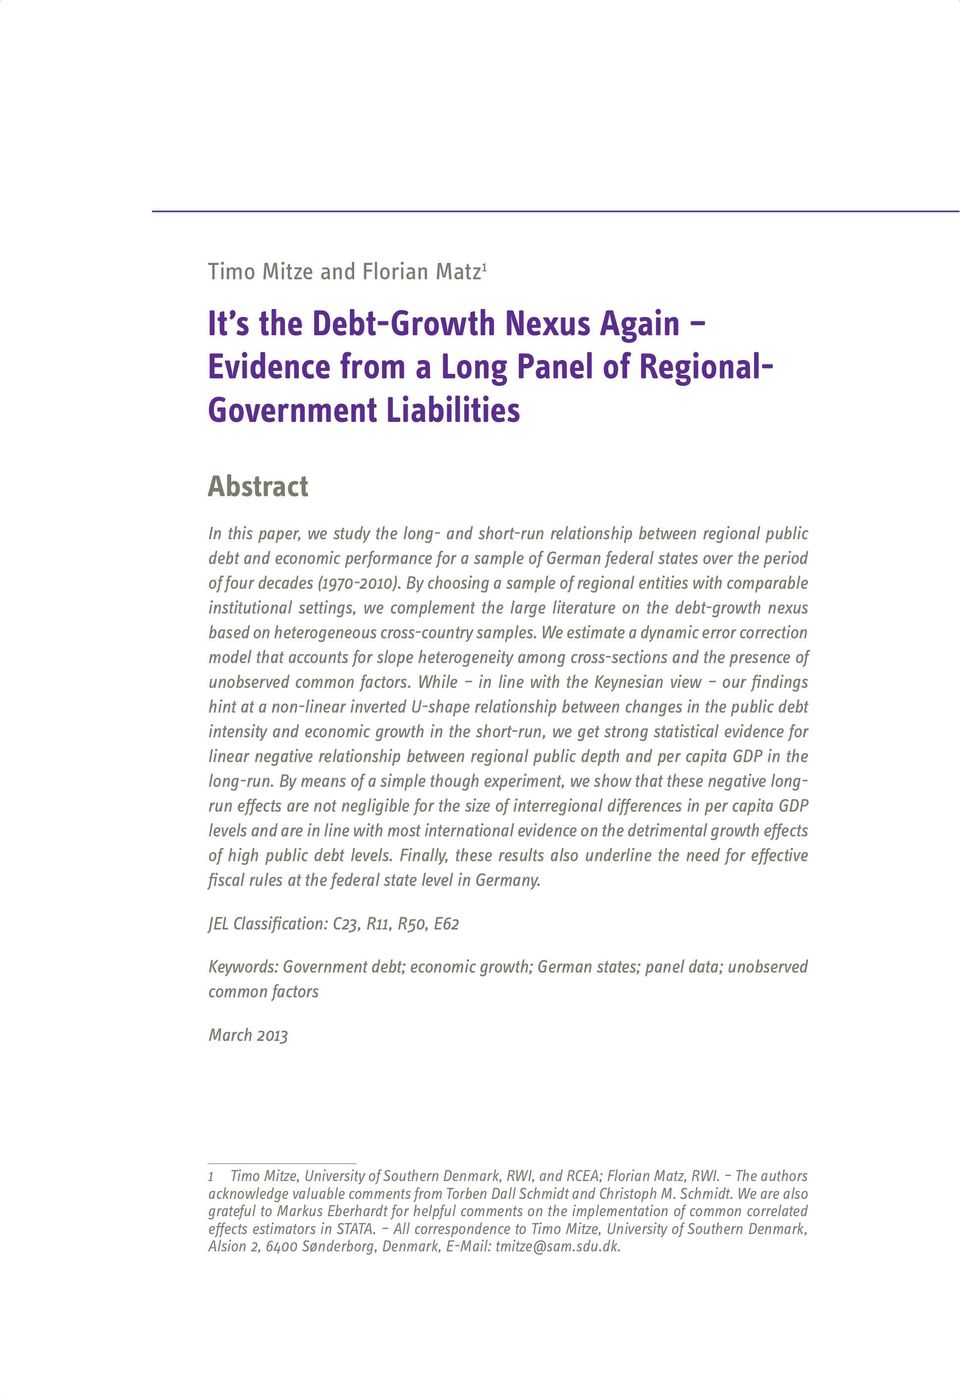 By choosing a sample of regional entities with comparable institutional settings, we complement the large literature on the debt-growth nexus based on heterogeneous cross-country samples.